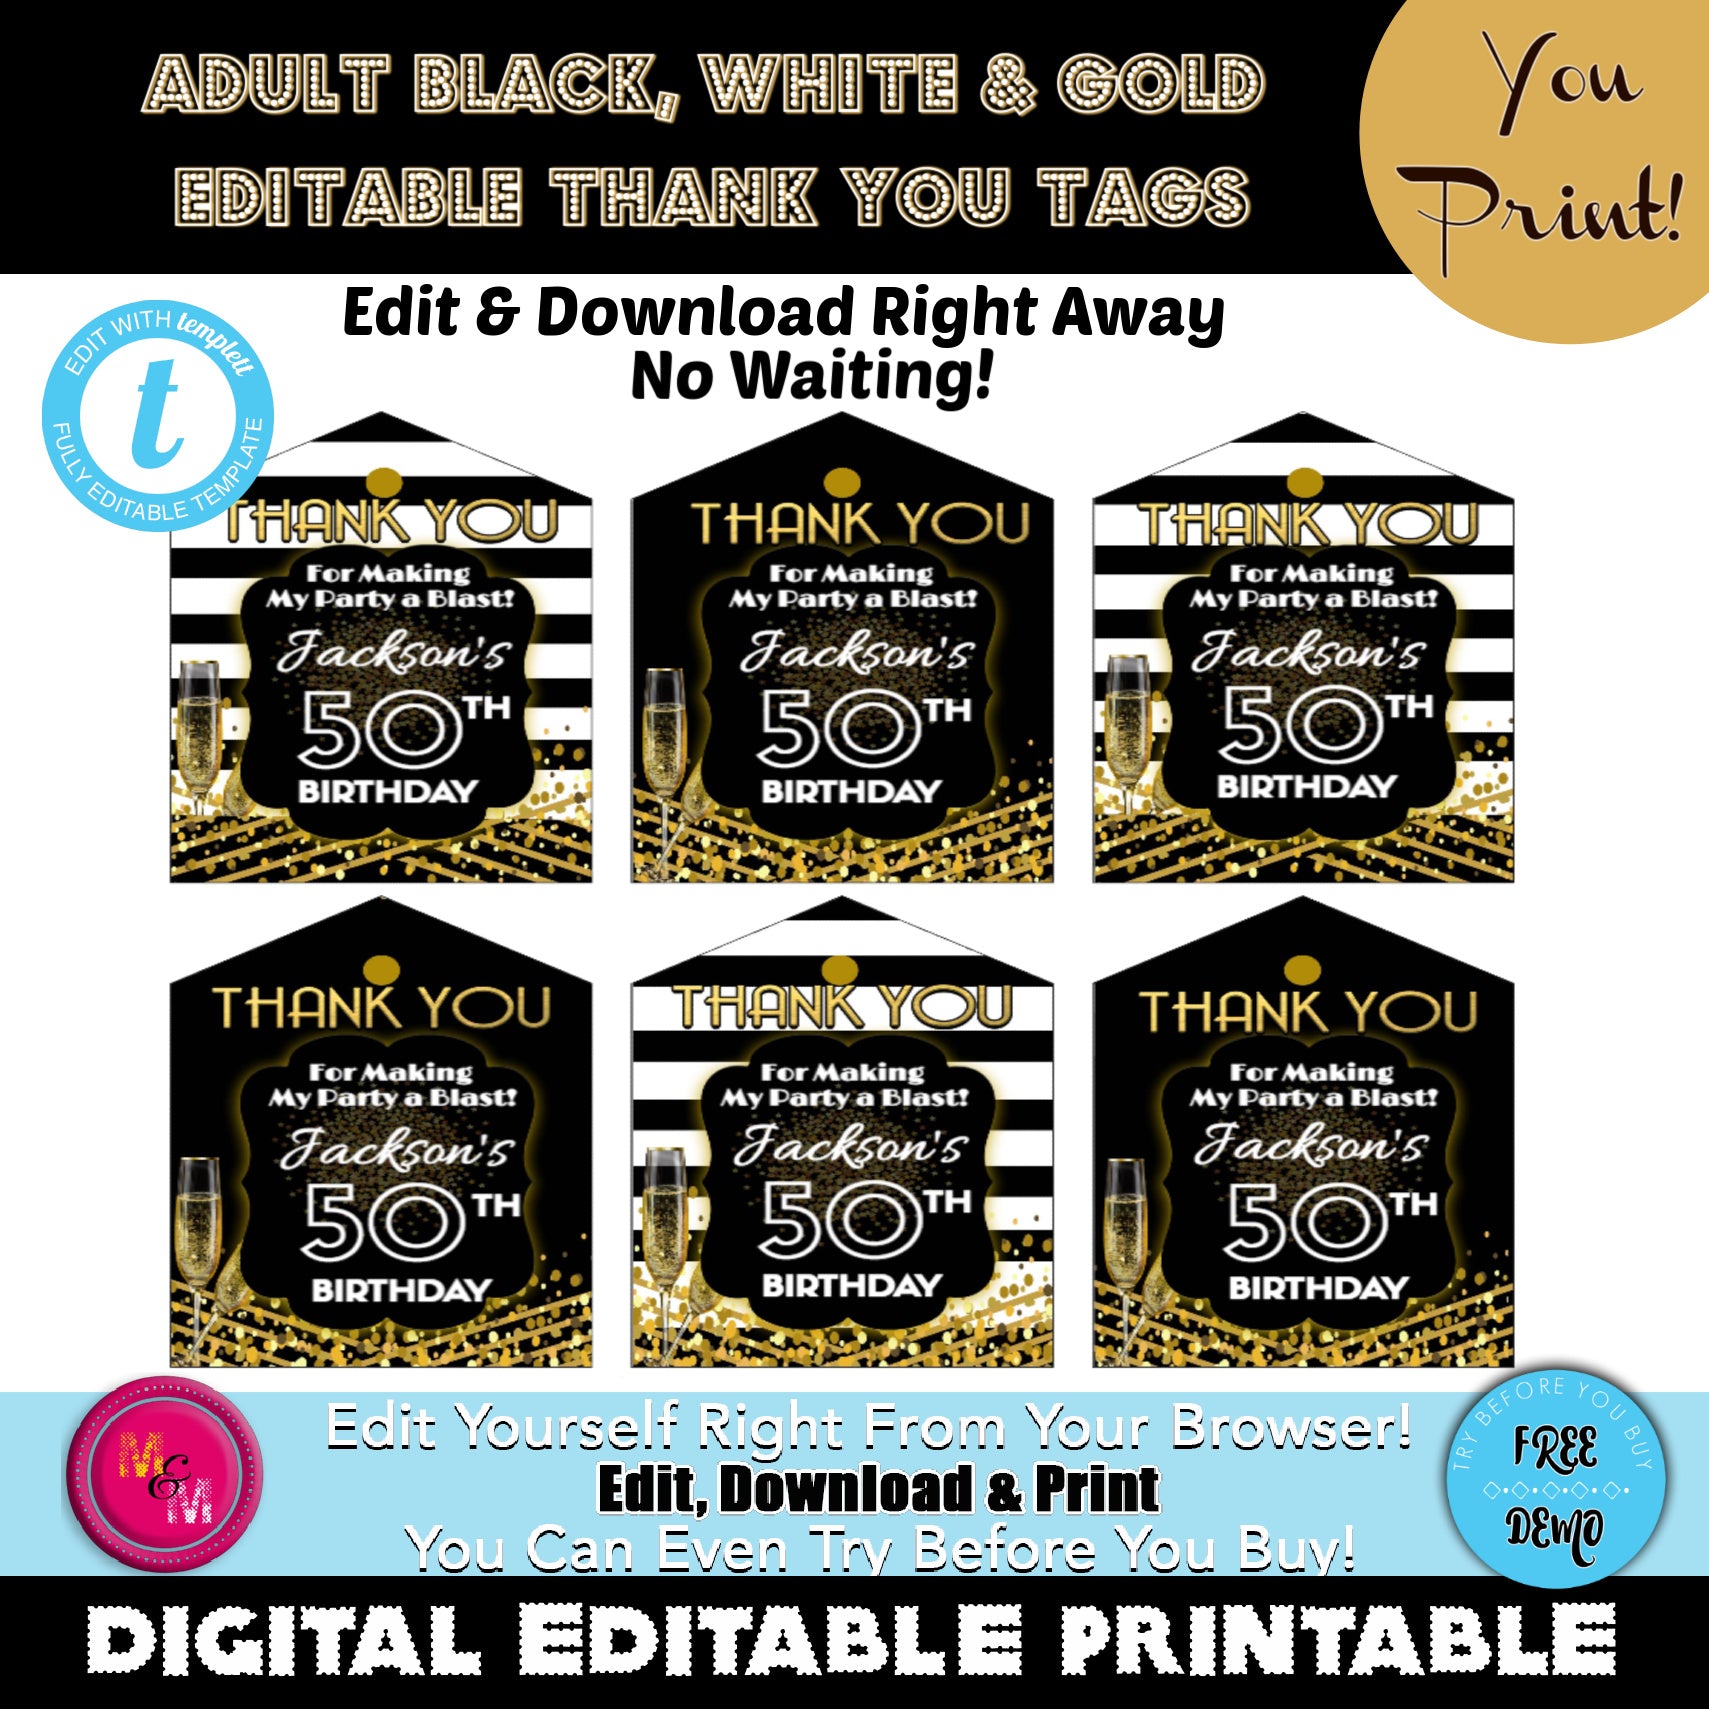 Editable Black, White & Gold Thank You Favor Tags Printable, Black and White Gift Bag Tags, Black and White Thank You Tags, Gift Bag Tags